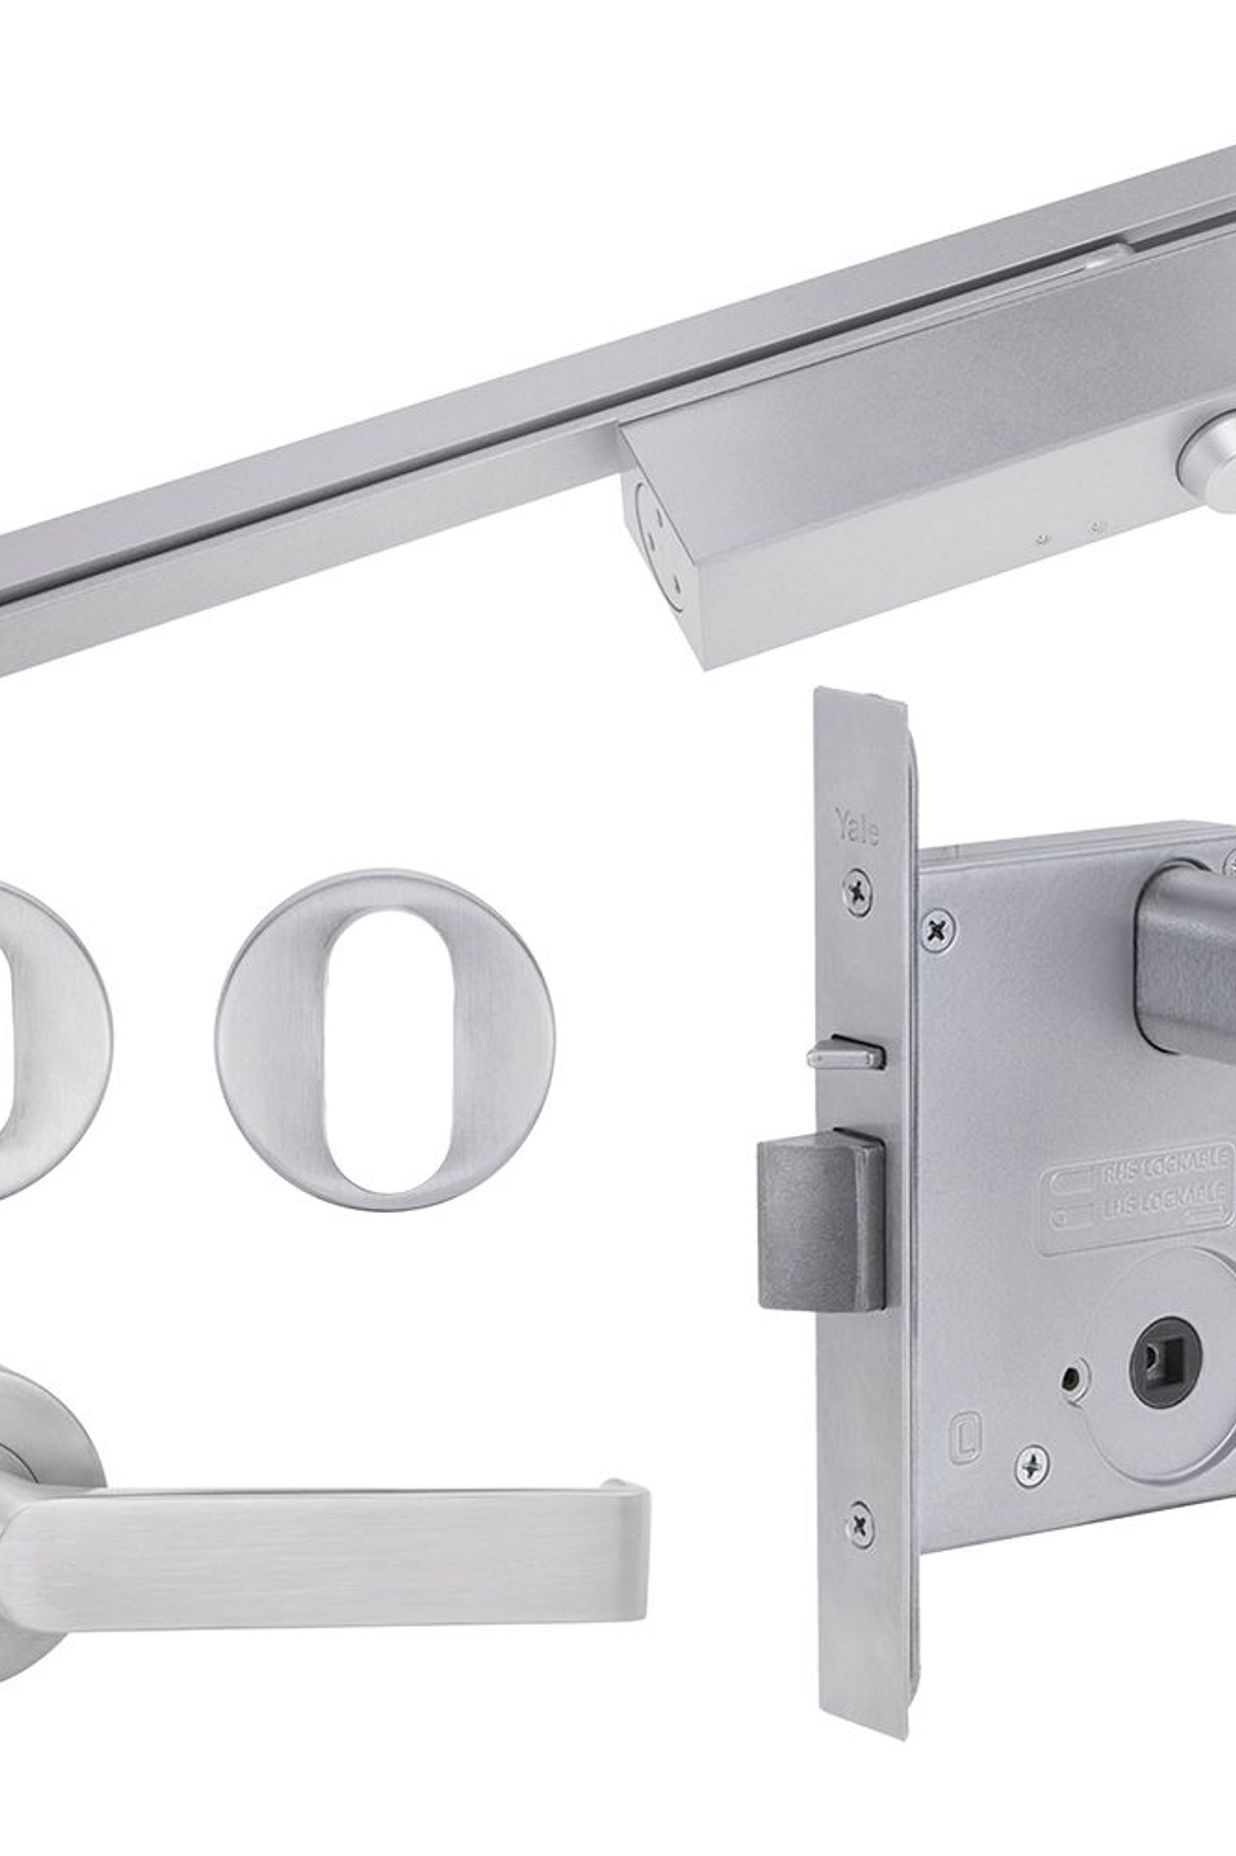 By including both the door furniture closer and lock all in one for a common door type, the Yale Simplicity Series is an efficient and cost-effective solution for multiunit developments.